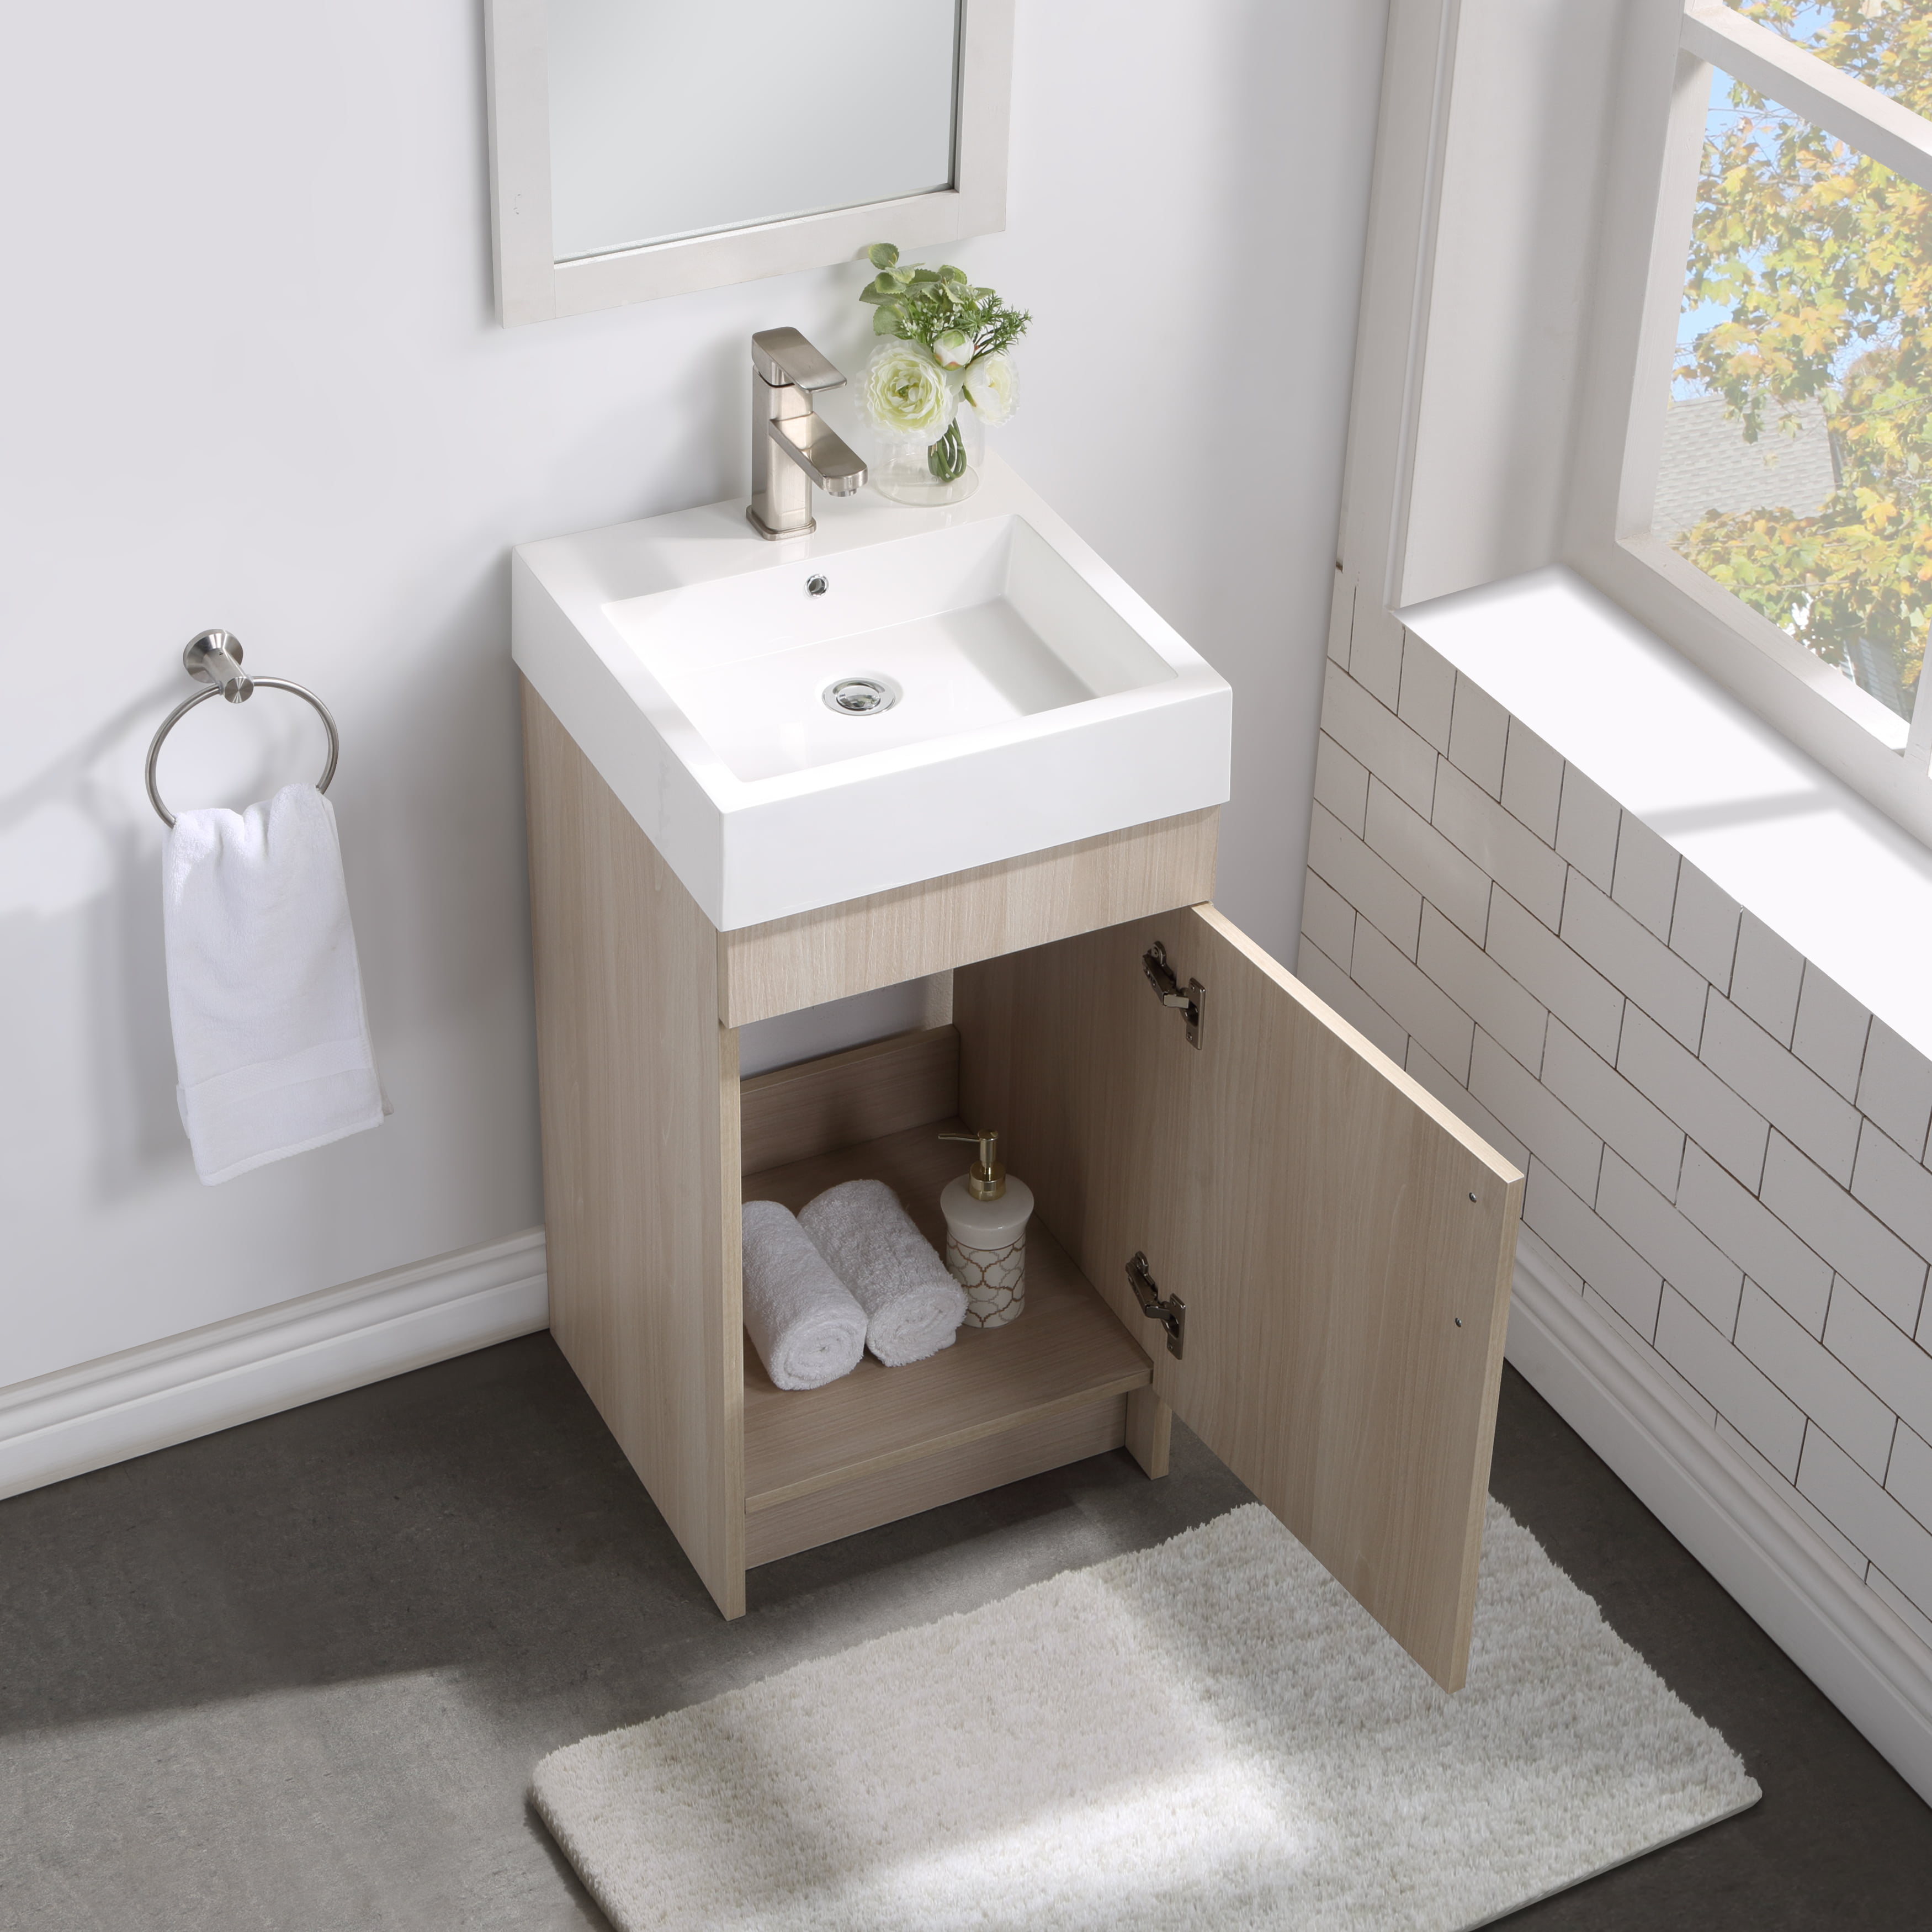 Mainstays Farmhouse 17 75 Inch White Woodgrain Single Sink Bathroom Vanity With Top Assembly Required Com - Farmhouse 17 75 Inch Rustic Grey Single Sink Bathroom Vanity With Top